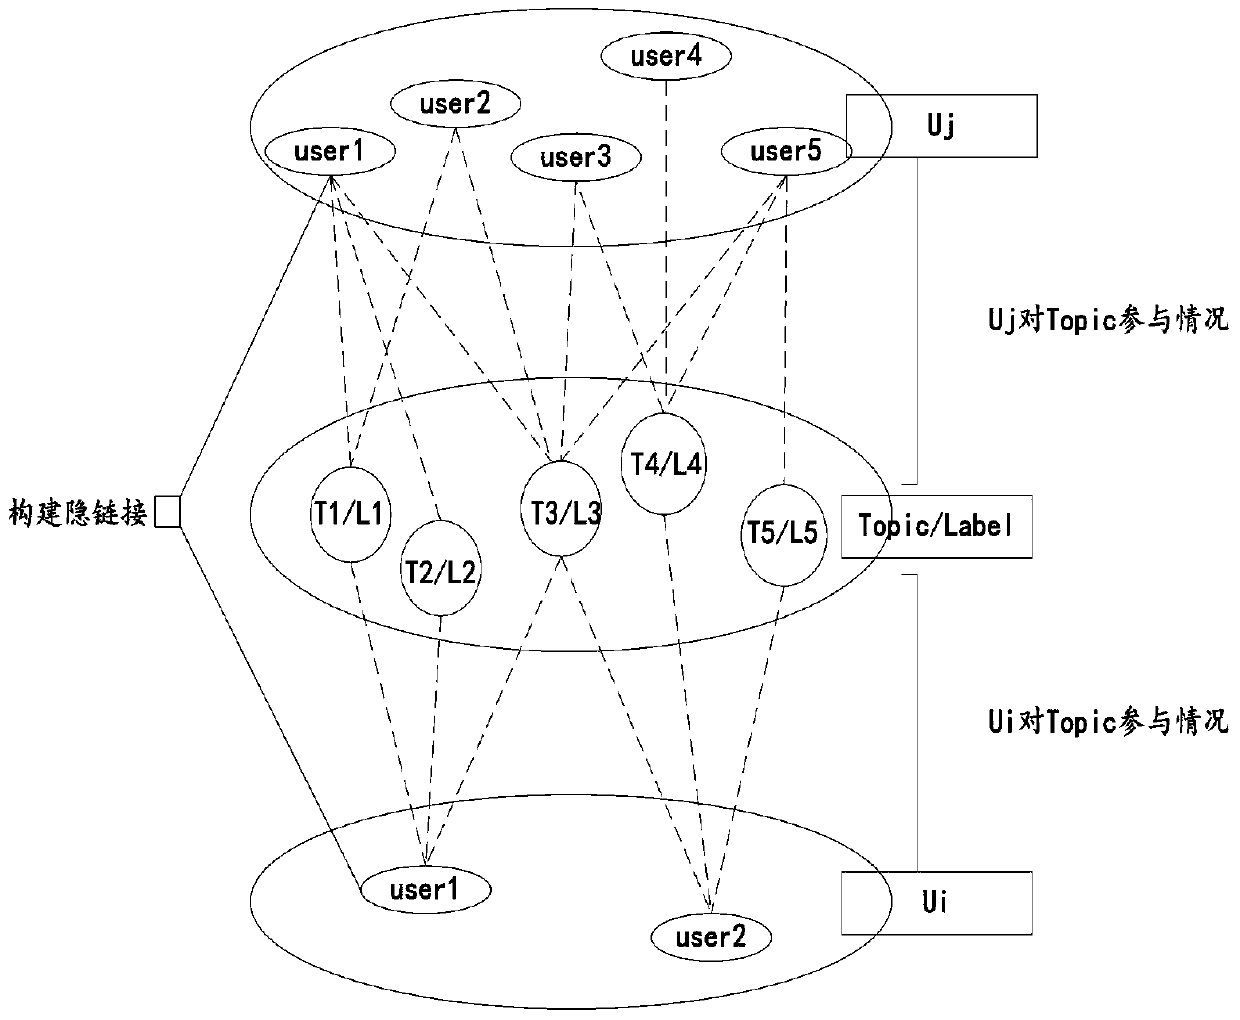 A method and system for analyzing user participation in hot topic behavior based on hidden links